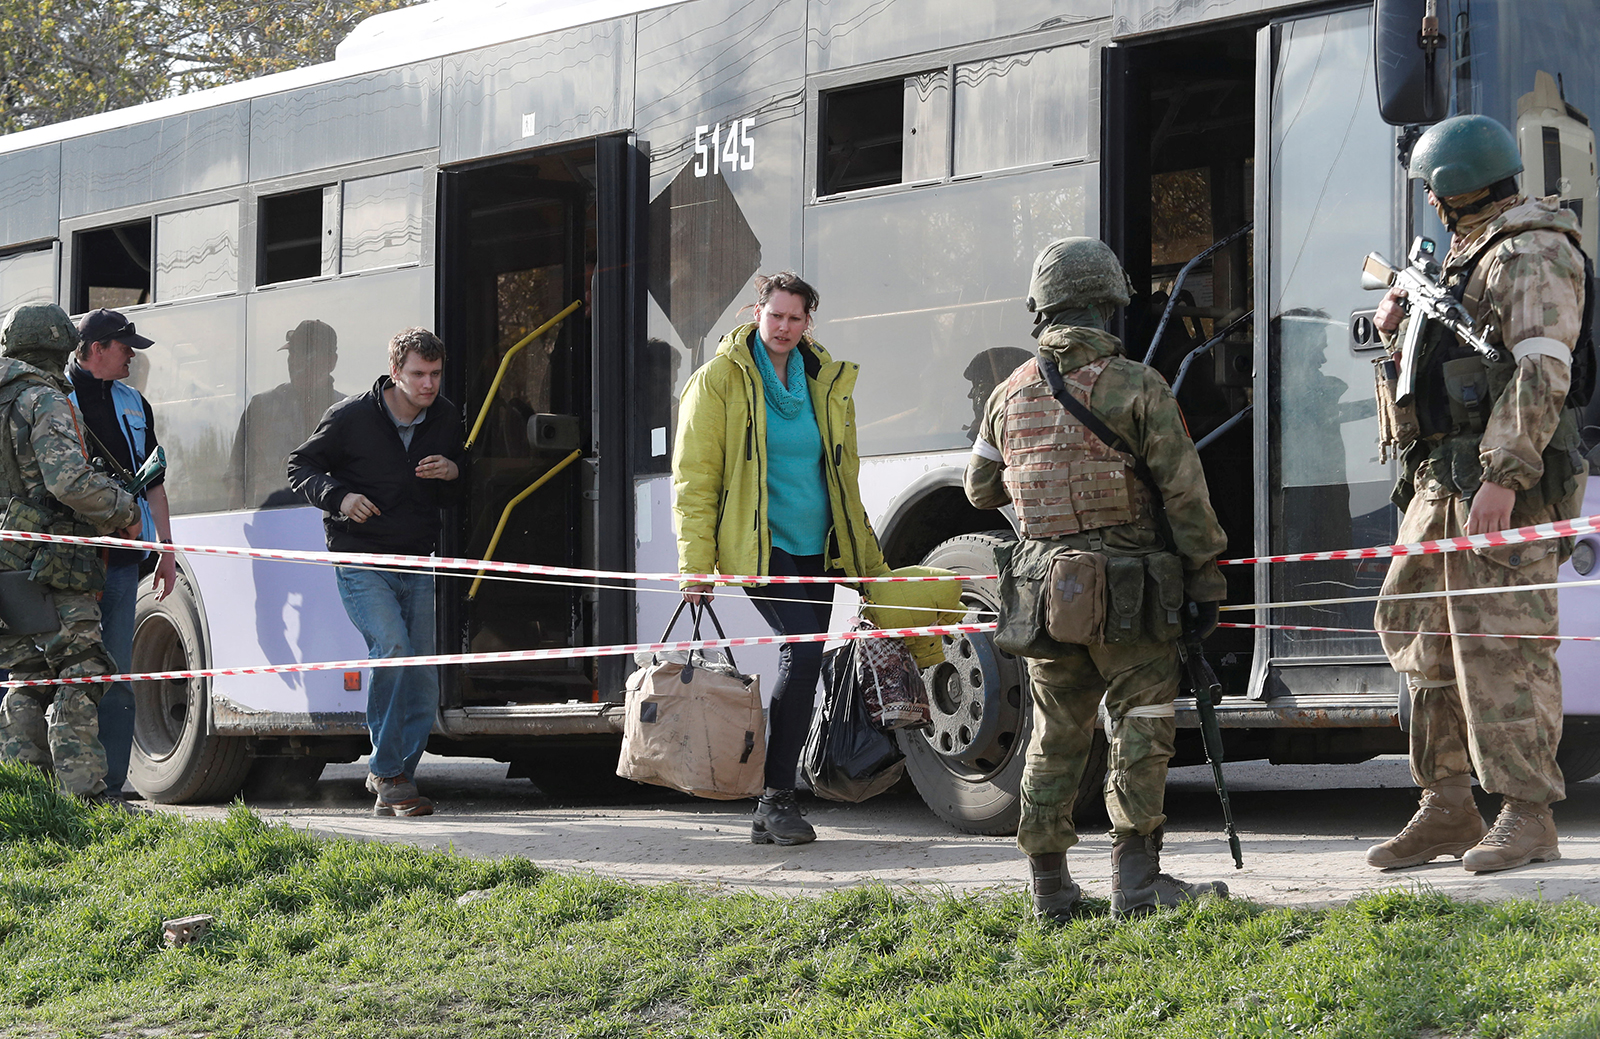 Azovstal steel plant employee Natalia Usmanova, 37, who was evacuated from Mariupol, arrives at a temporary accommodation centre during Ukraine-Russia conflict in the village of Bezimenne in the Donetsk Region, Ukraine on May 1.